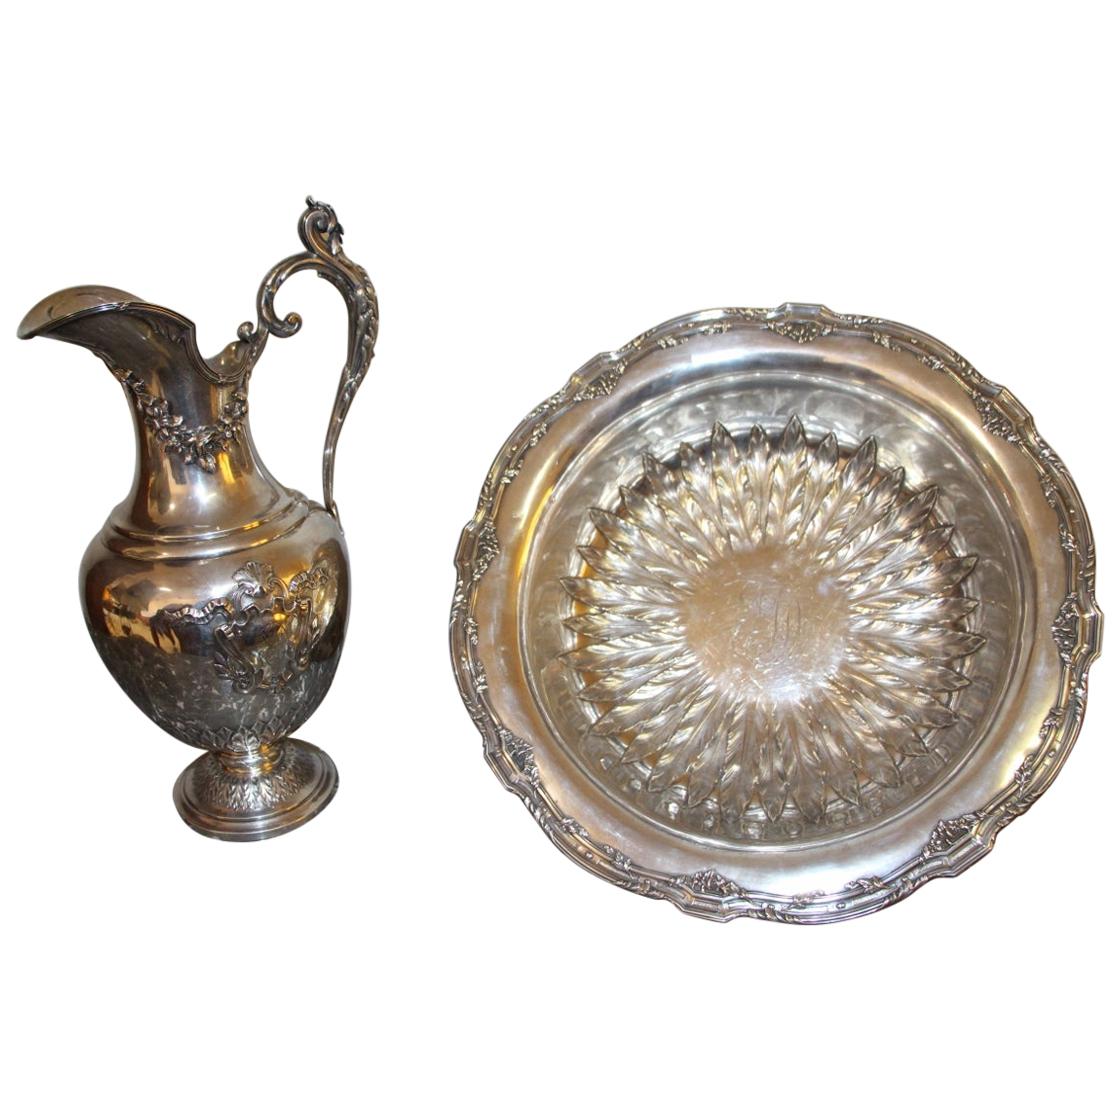 Large Ewer and Its Basin in Sterling Silver, 19th Century Flag